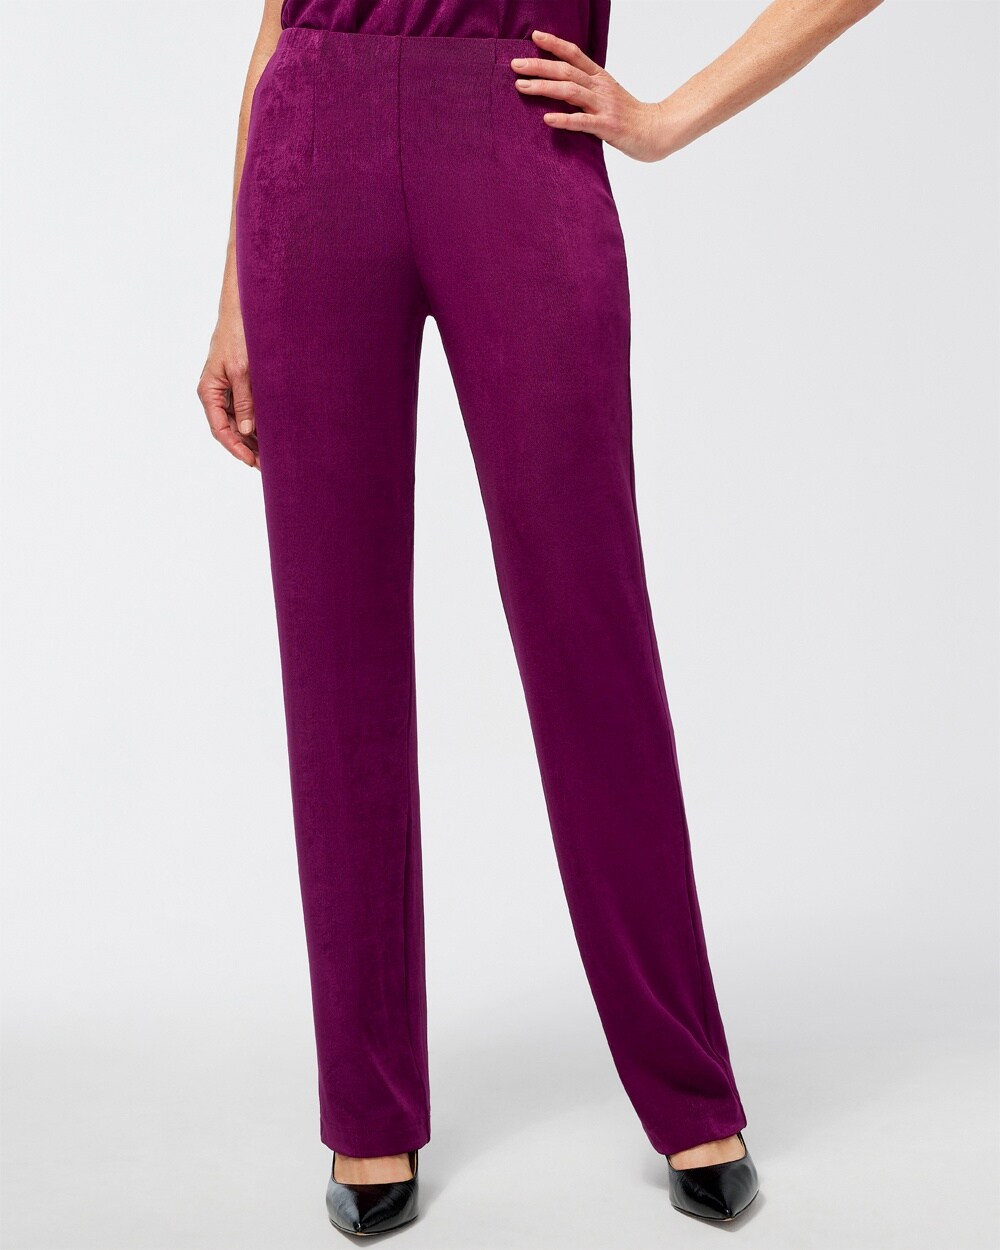 Travelers Collection Chelsea Seamed Pants Tall Length - Chico's